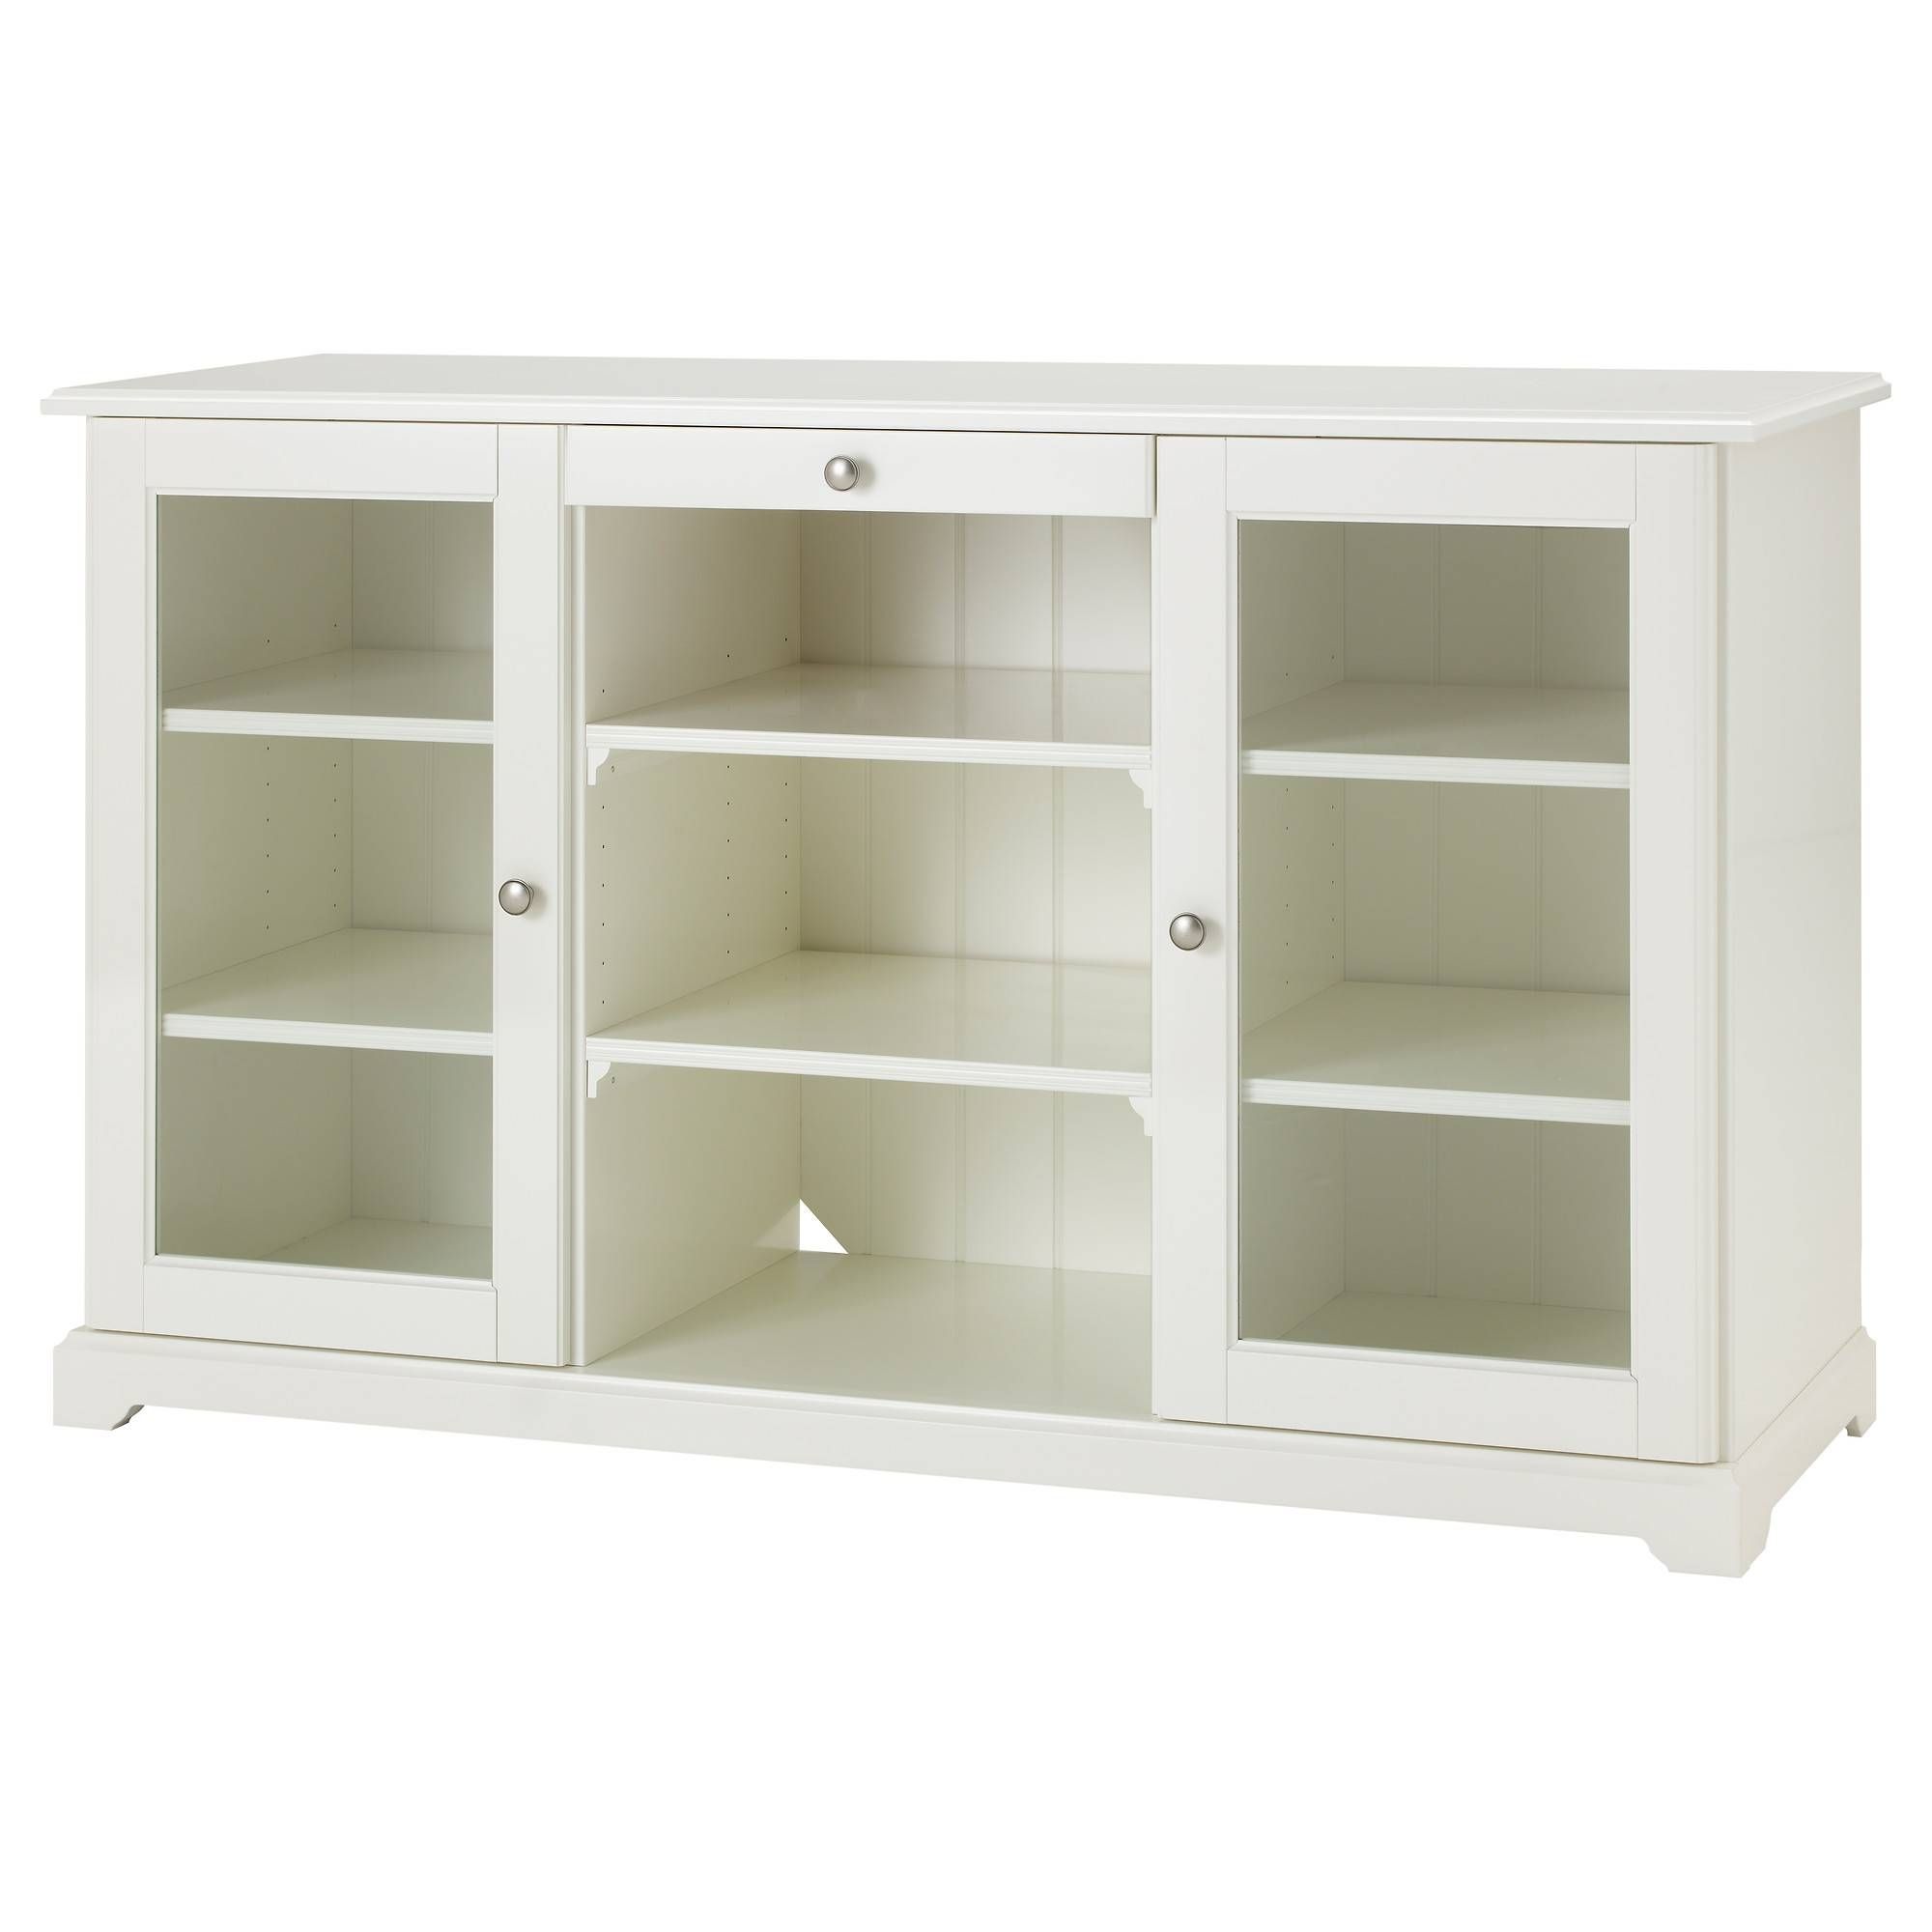 Liatorp Sideboard White 145x87 Cm – Ikea With Kitchen Sideboard White (View 4 of 20)